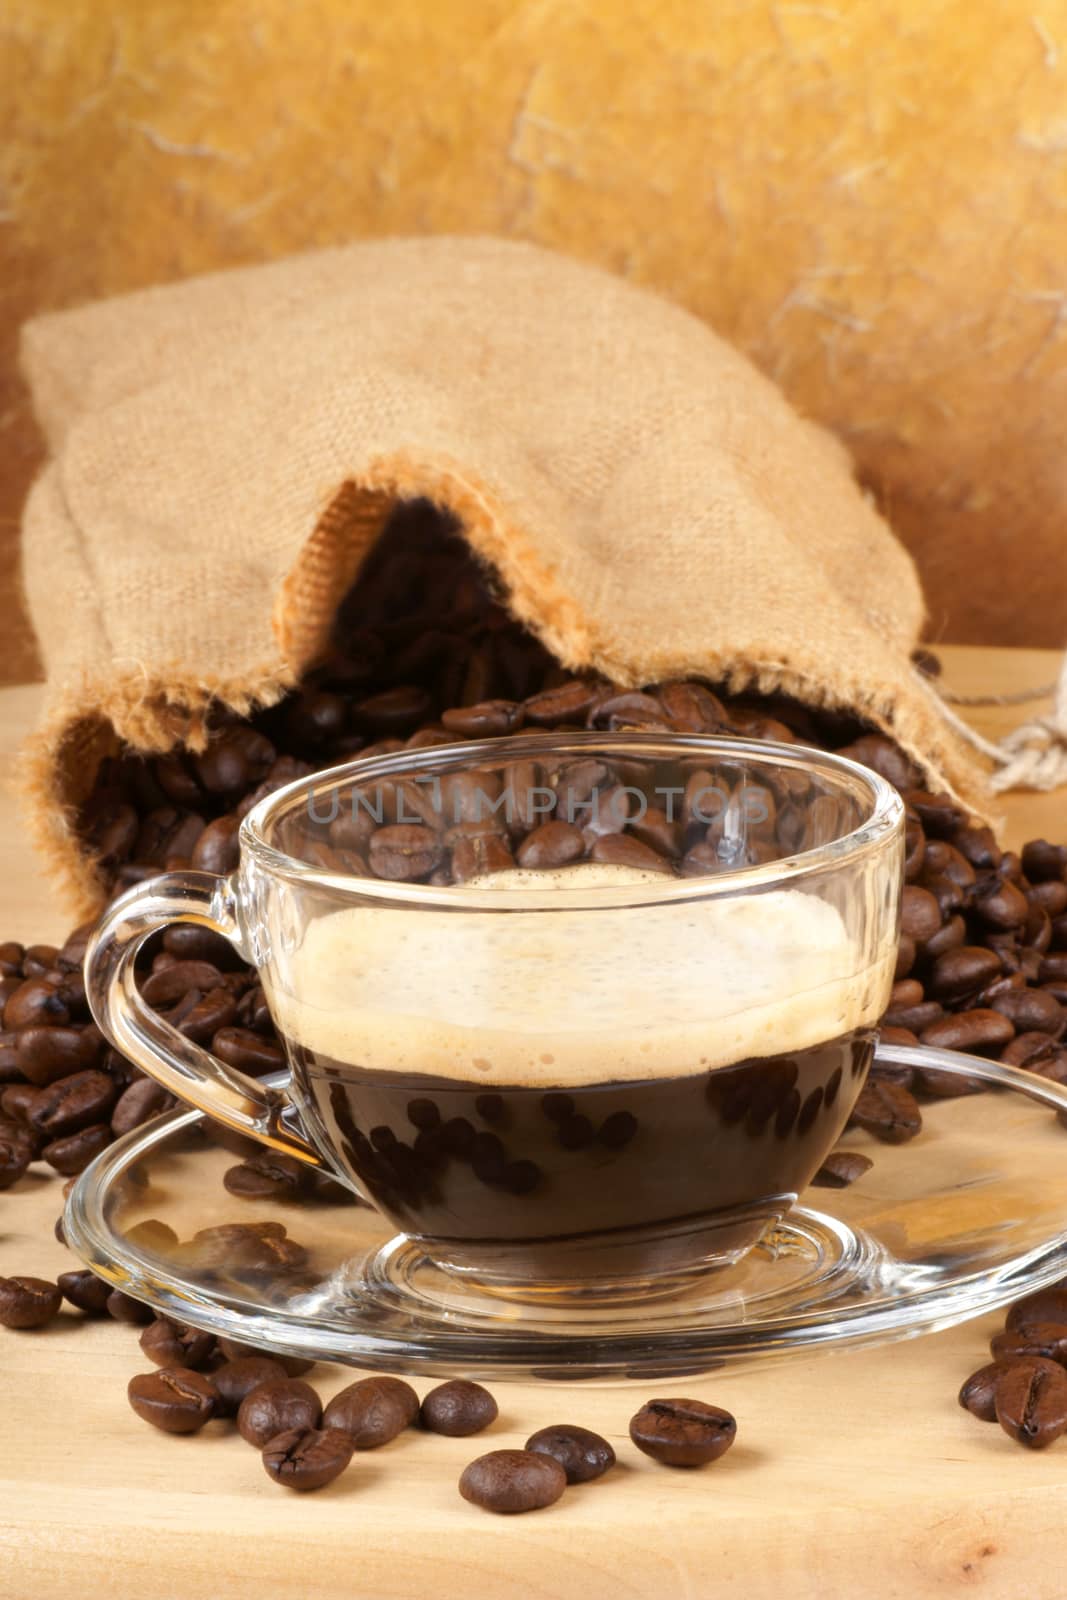 Close-up of a glass cup with italian espresso over a wooden table, surrounded by coffee beans.